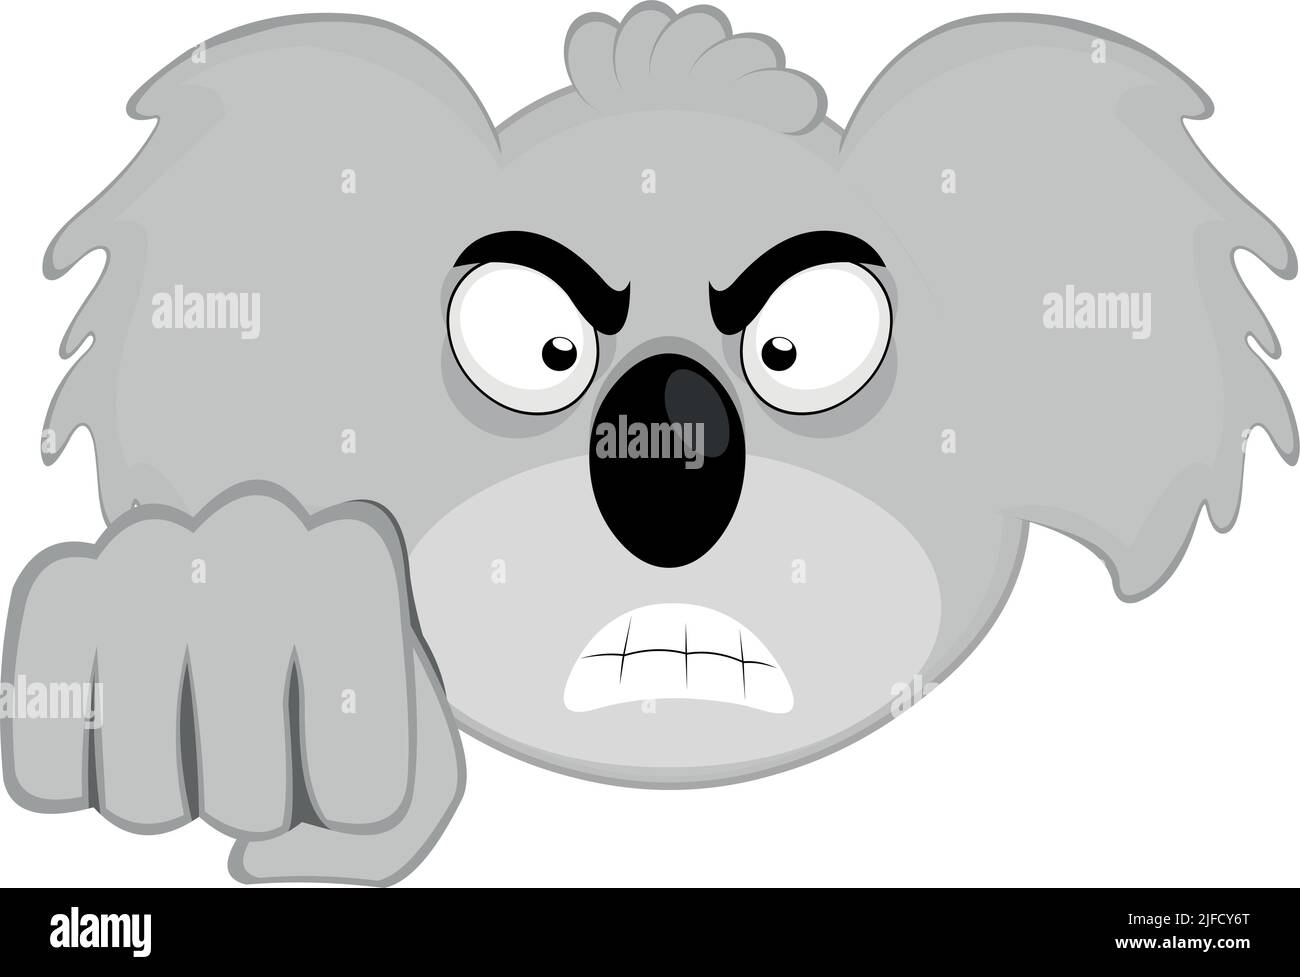 Vector illustration of the face of a koala cartoon with an angry expression and giving a fist bump Stock Vector